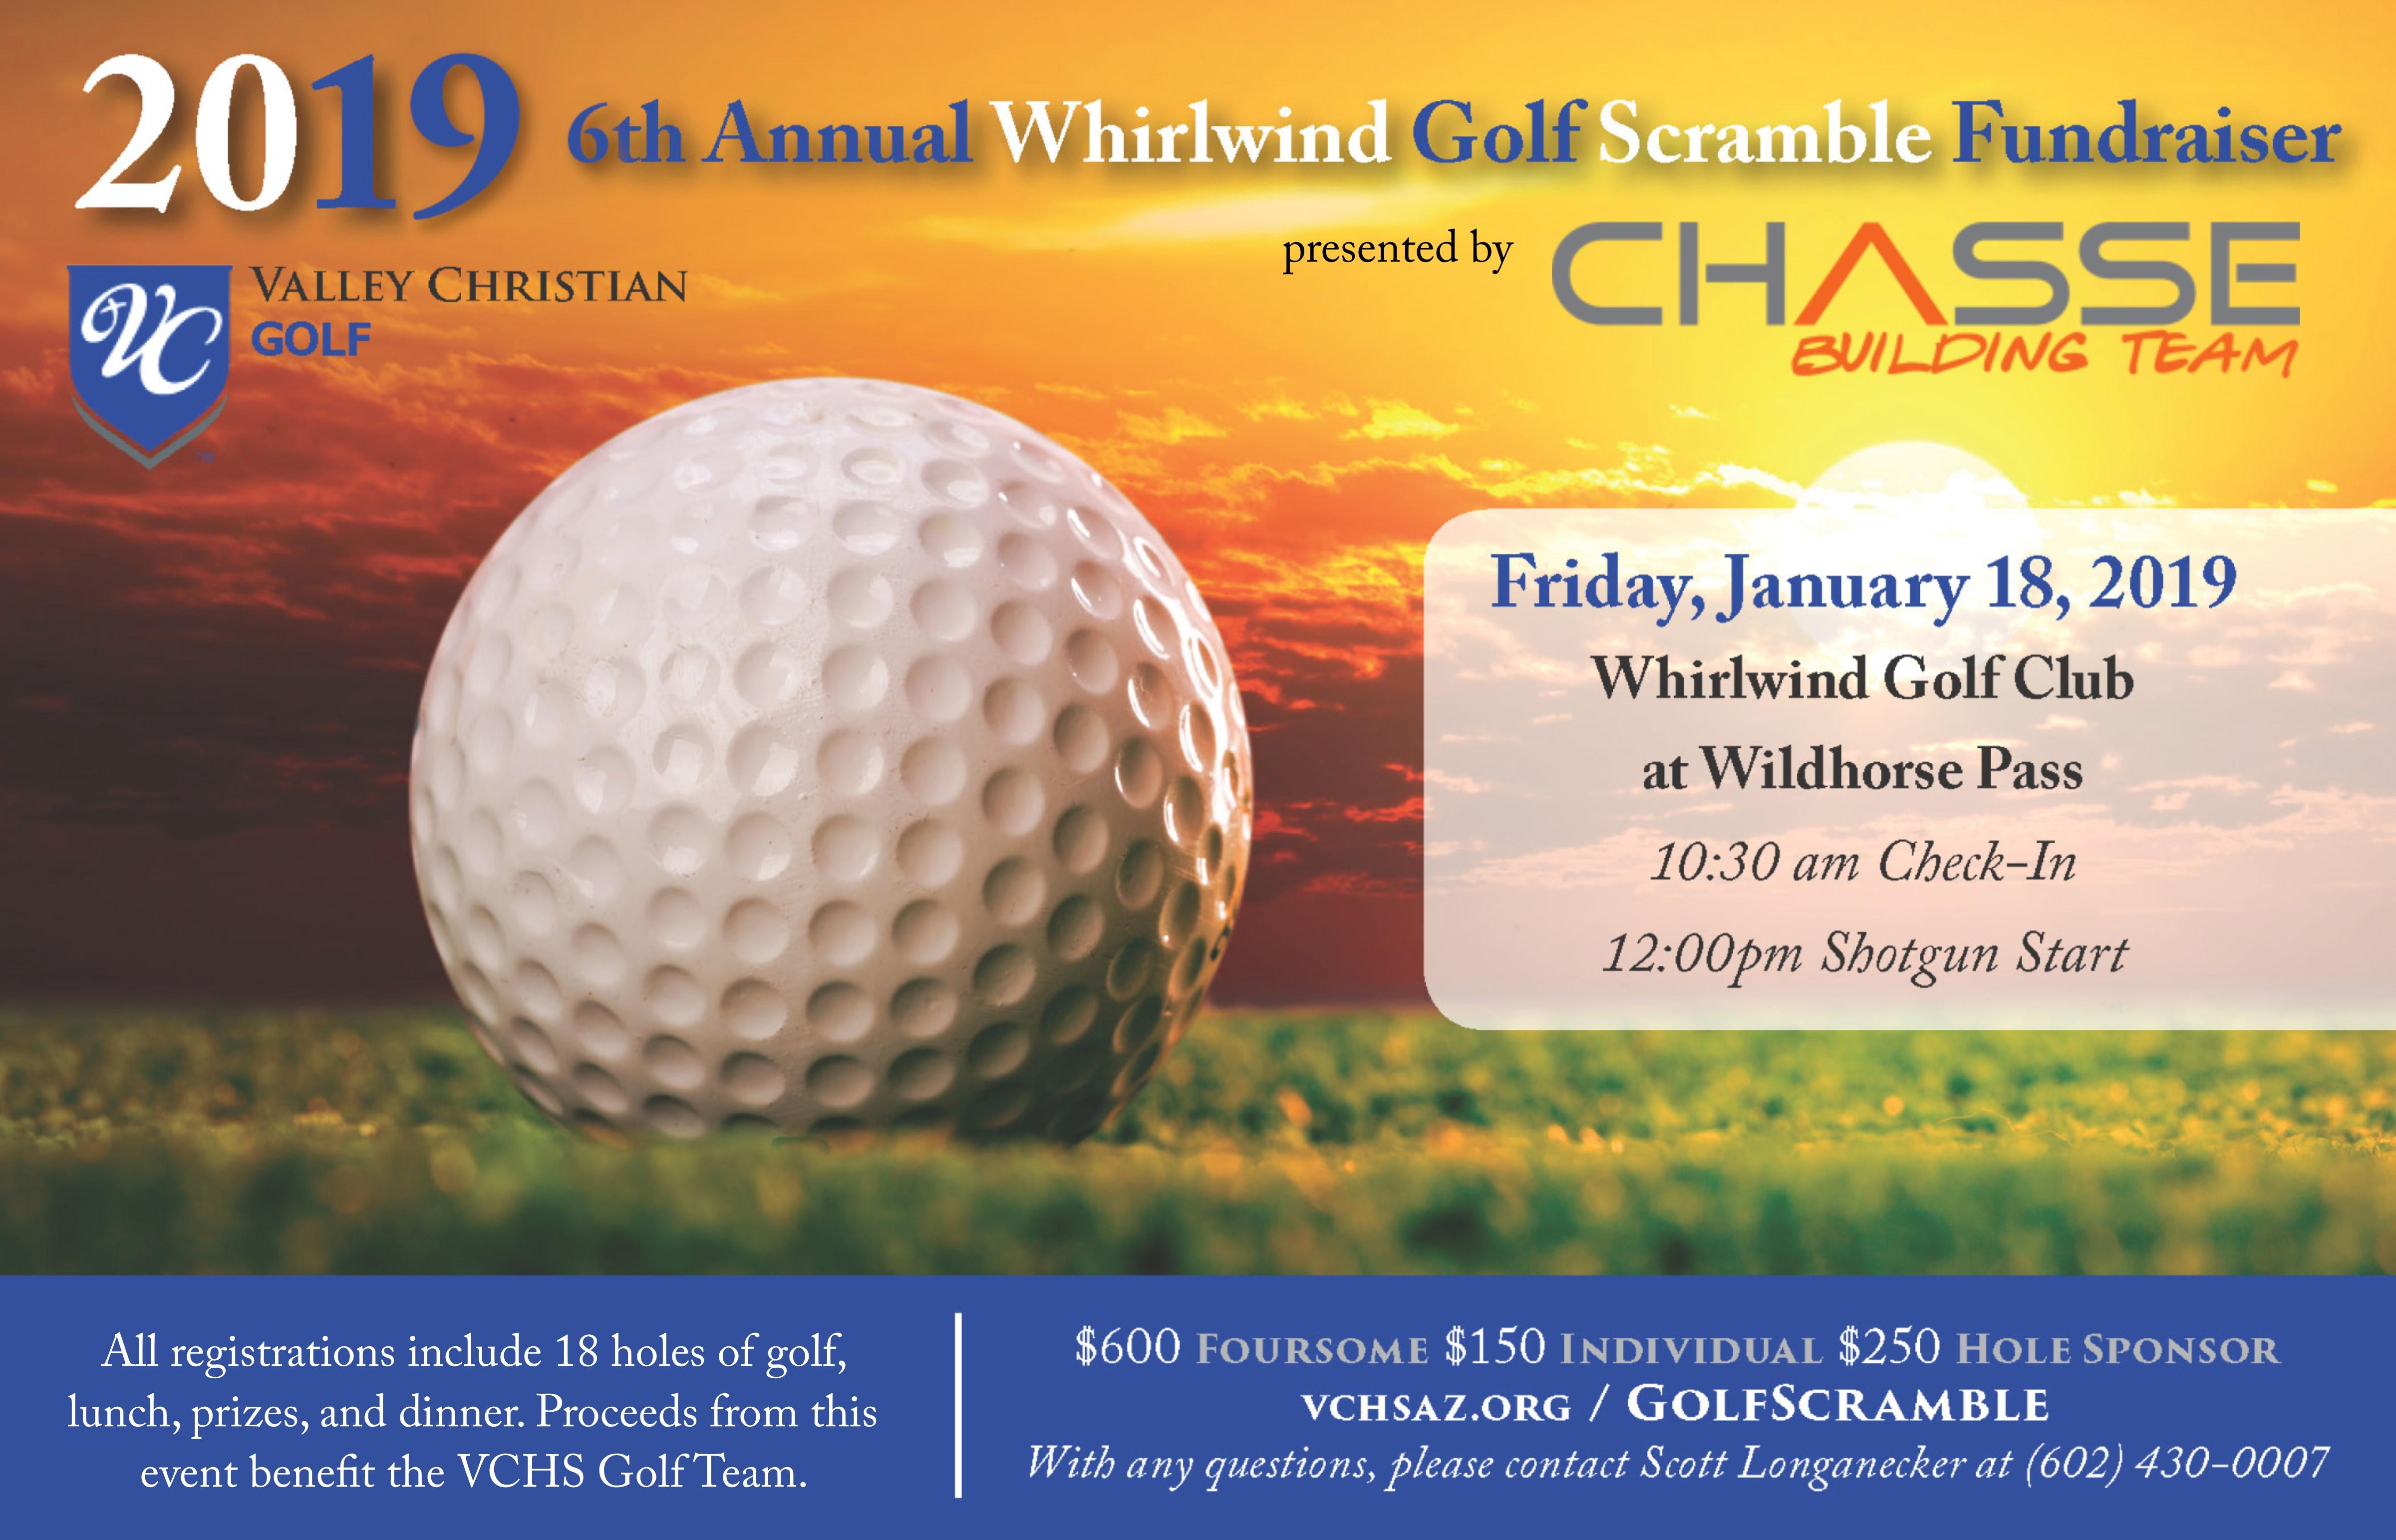 2019 Whirlwind Golf Scramble, presented by Chasse Building Team